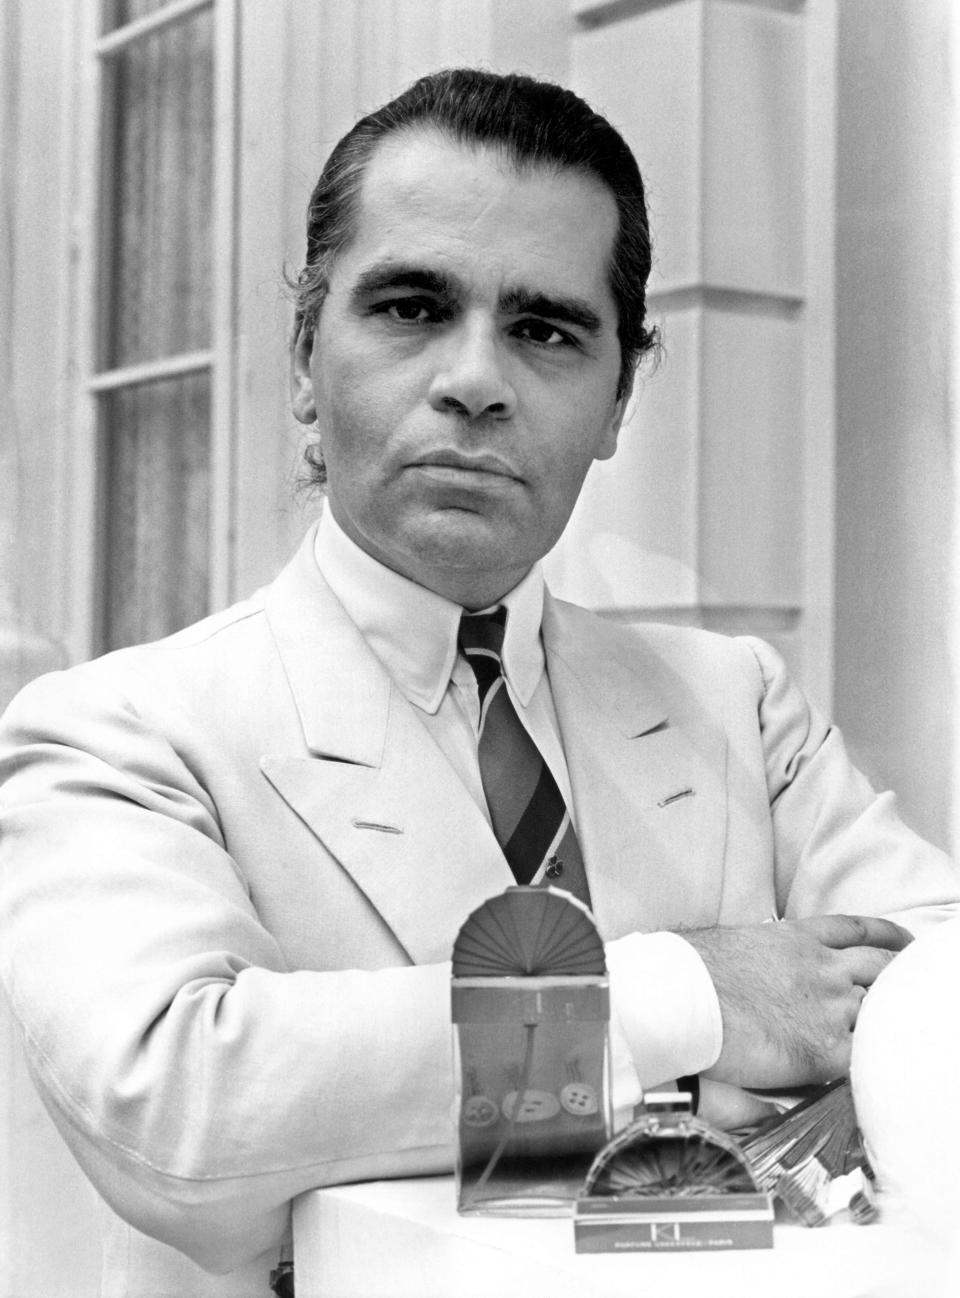 Karl Lagerfeld poses during the presentation of his "KL" fragrance in Hamburg, Germany, on July 29, 1982.